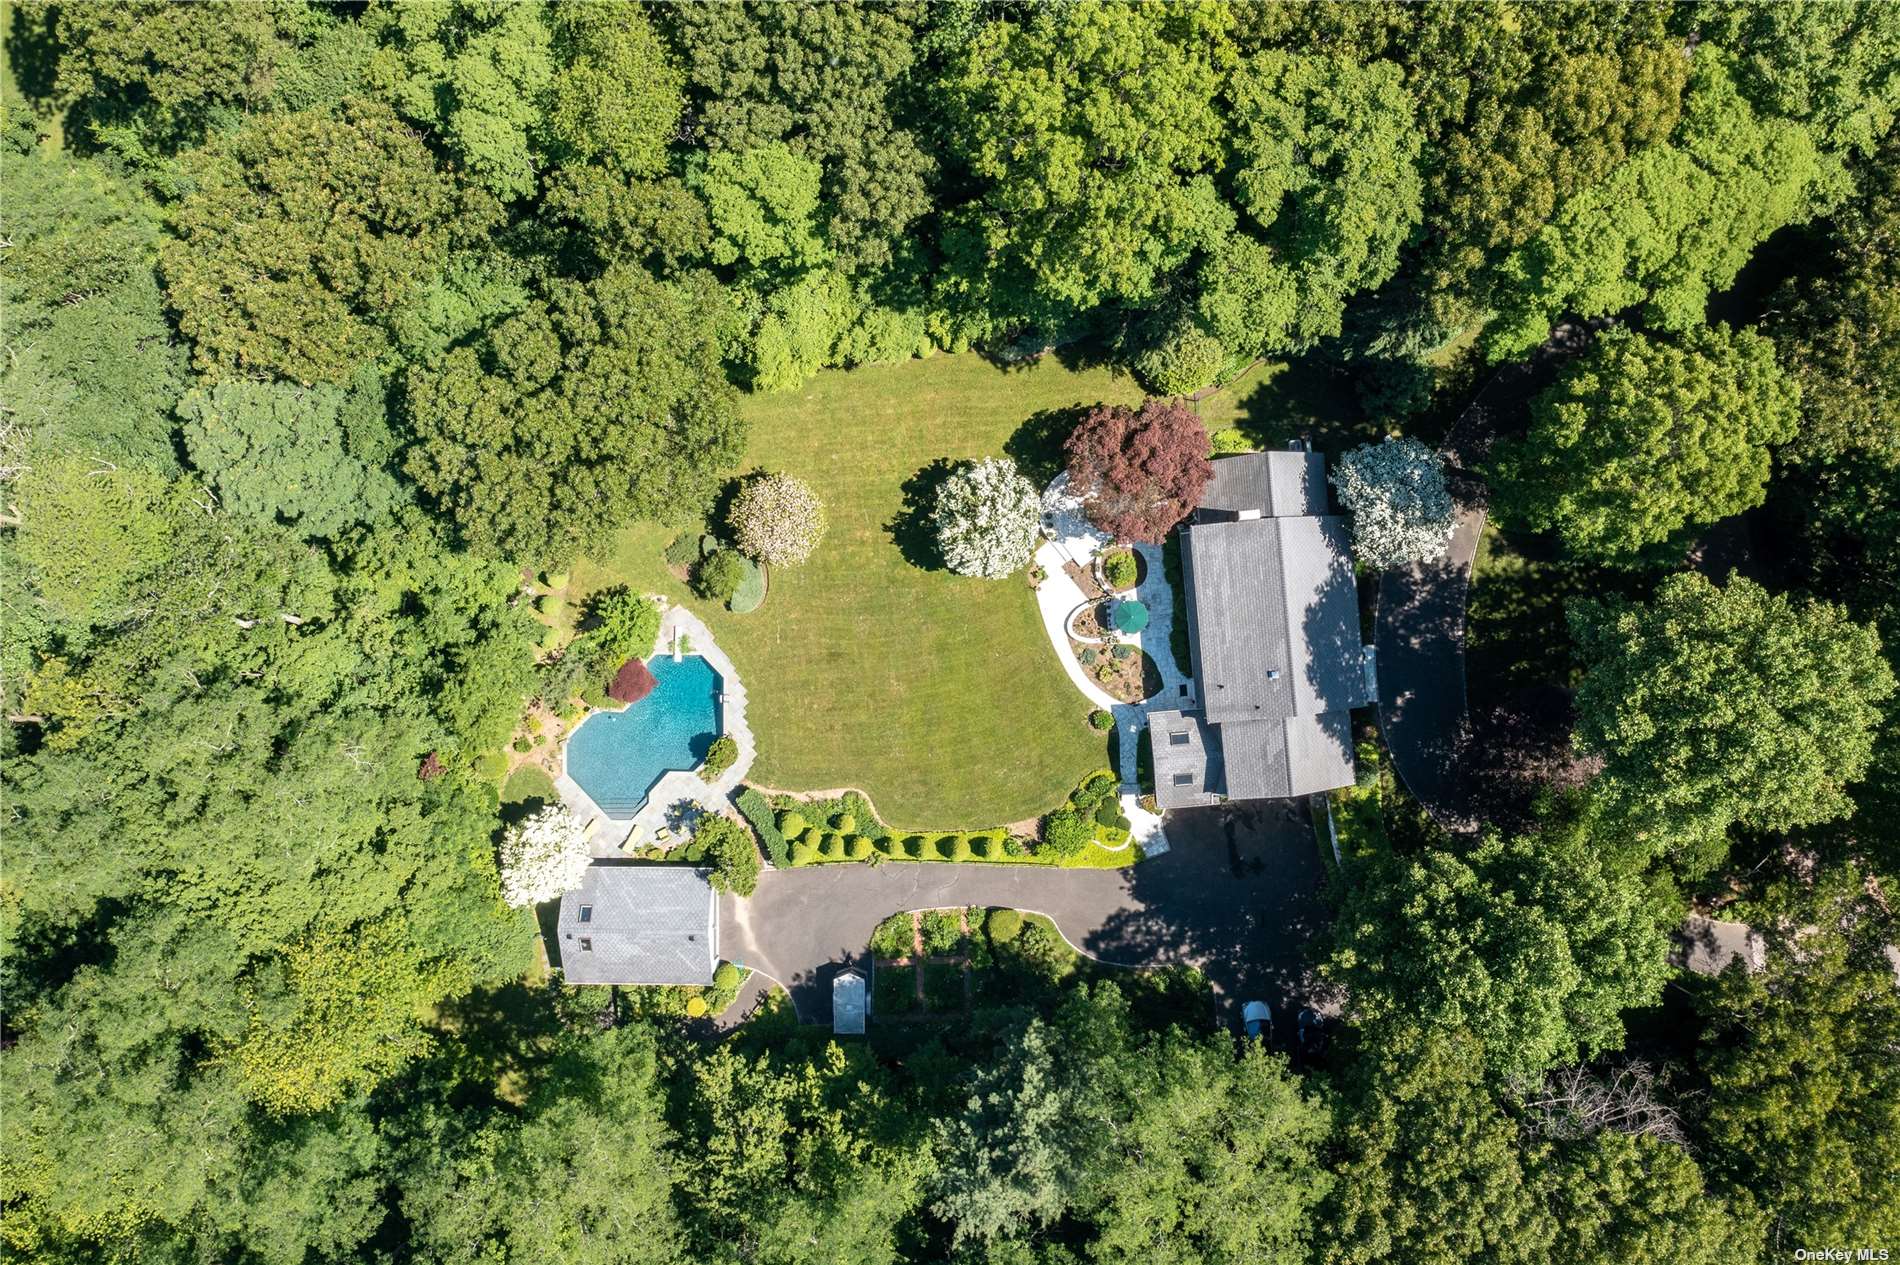 View Locust Valley, NY 11560 house